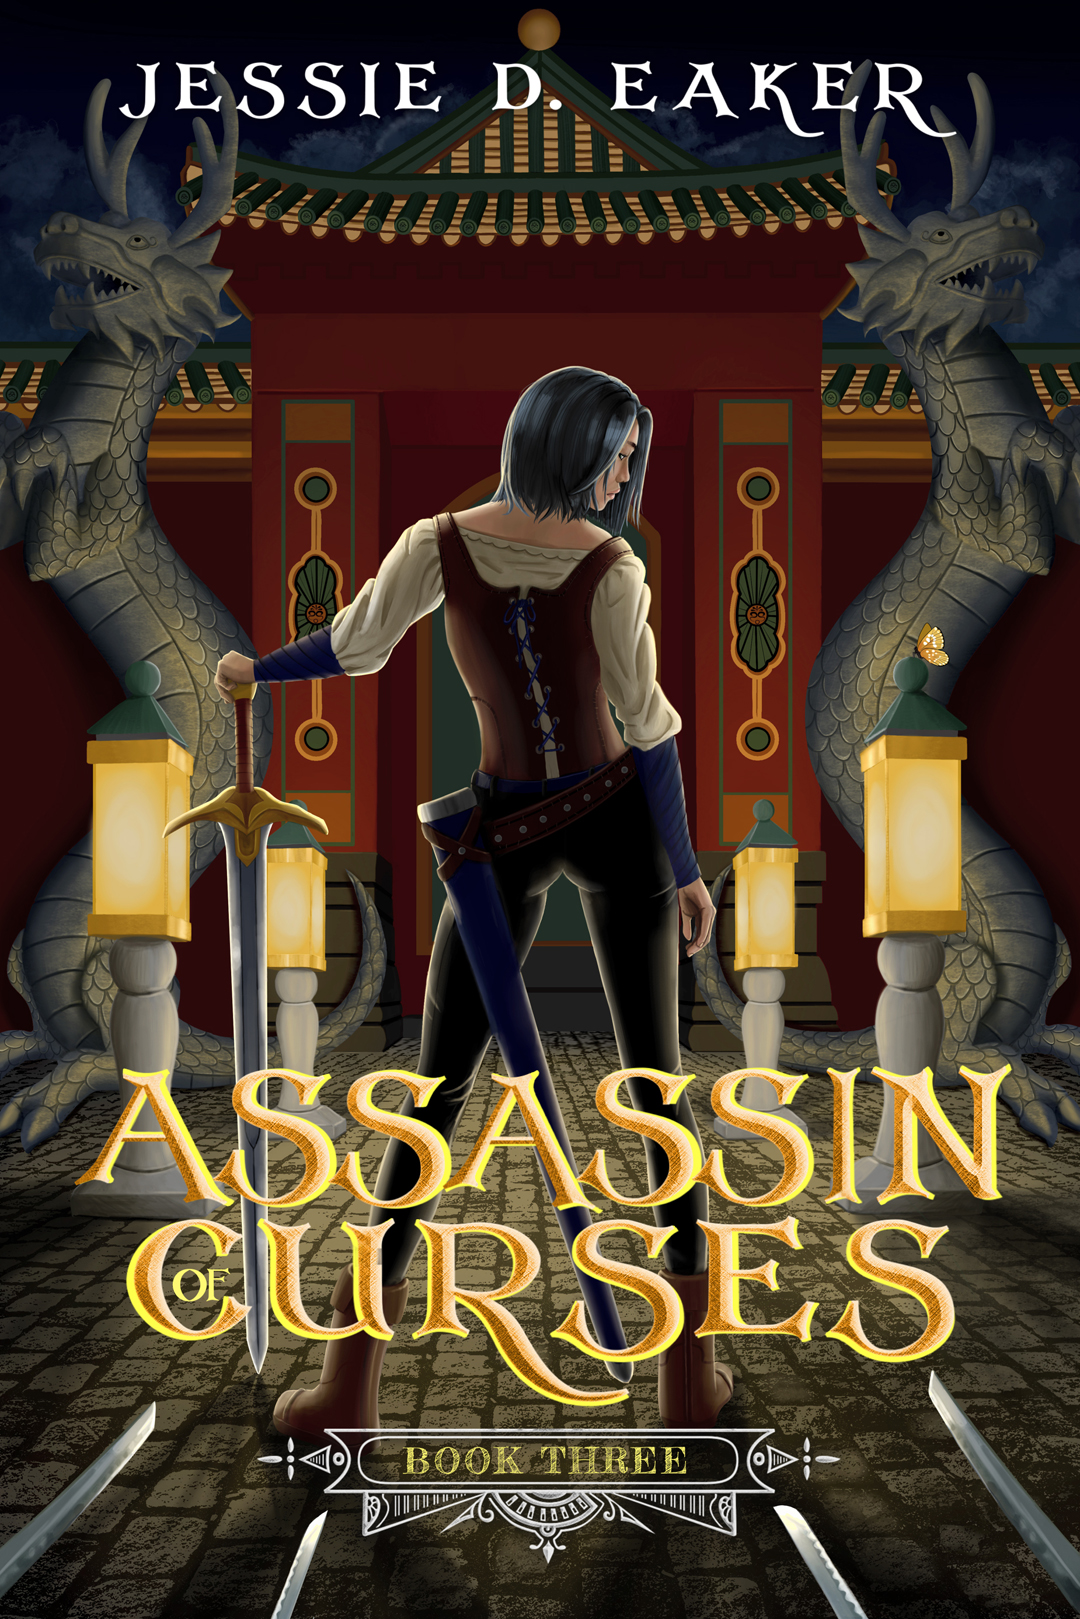 Assasin of Curses full cover FINAL for poster